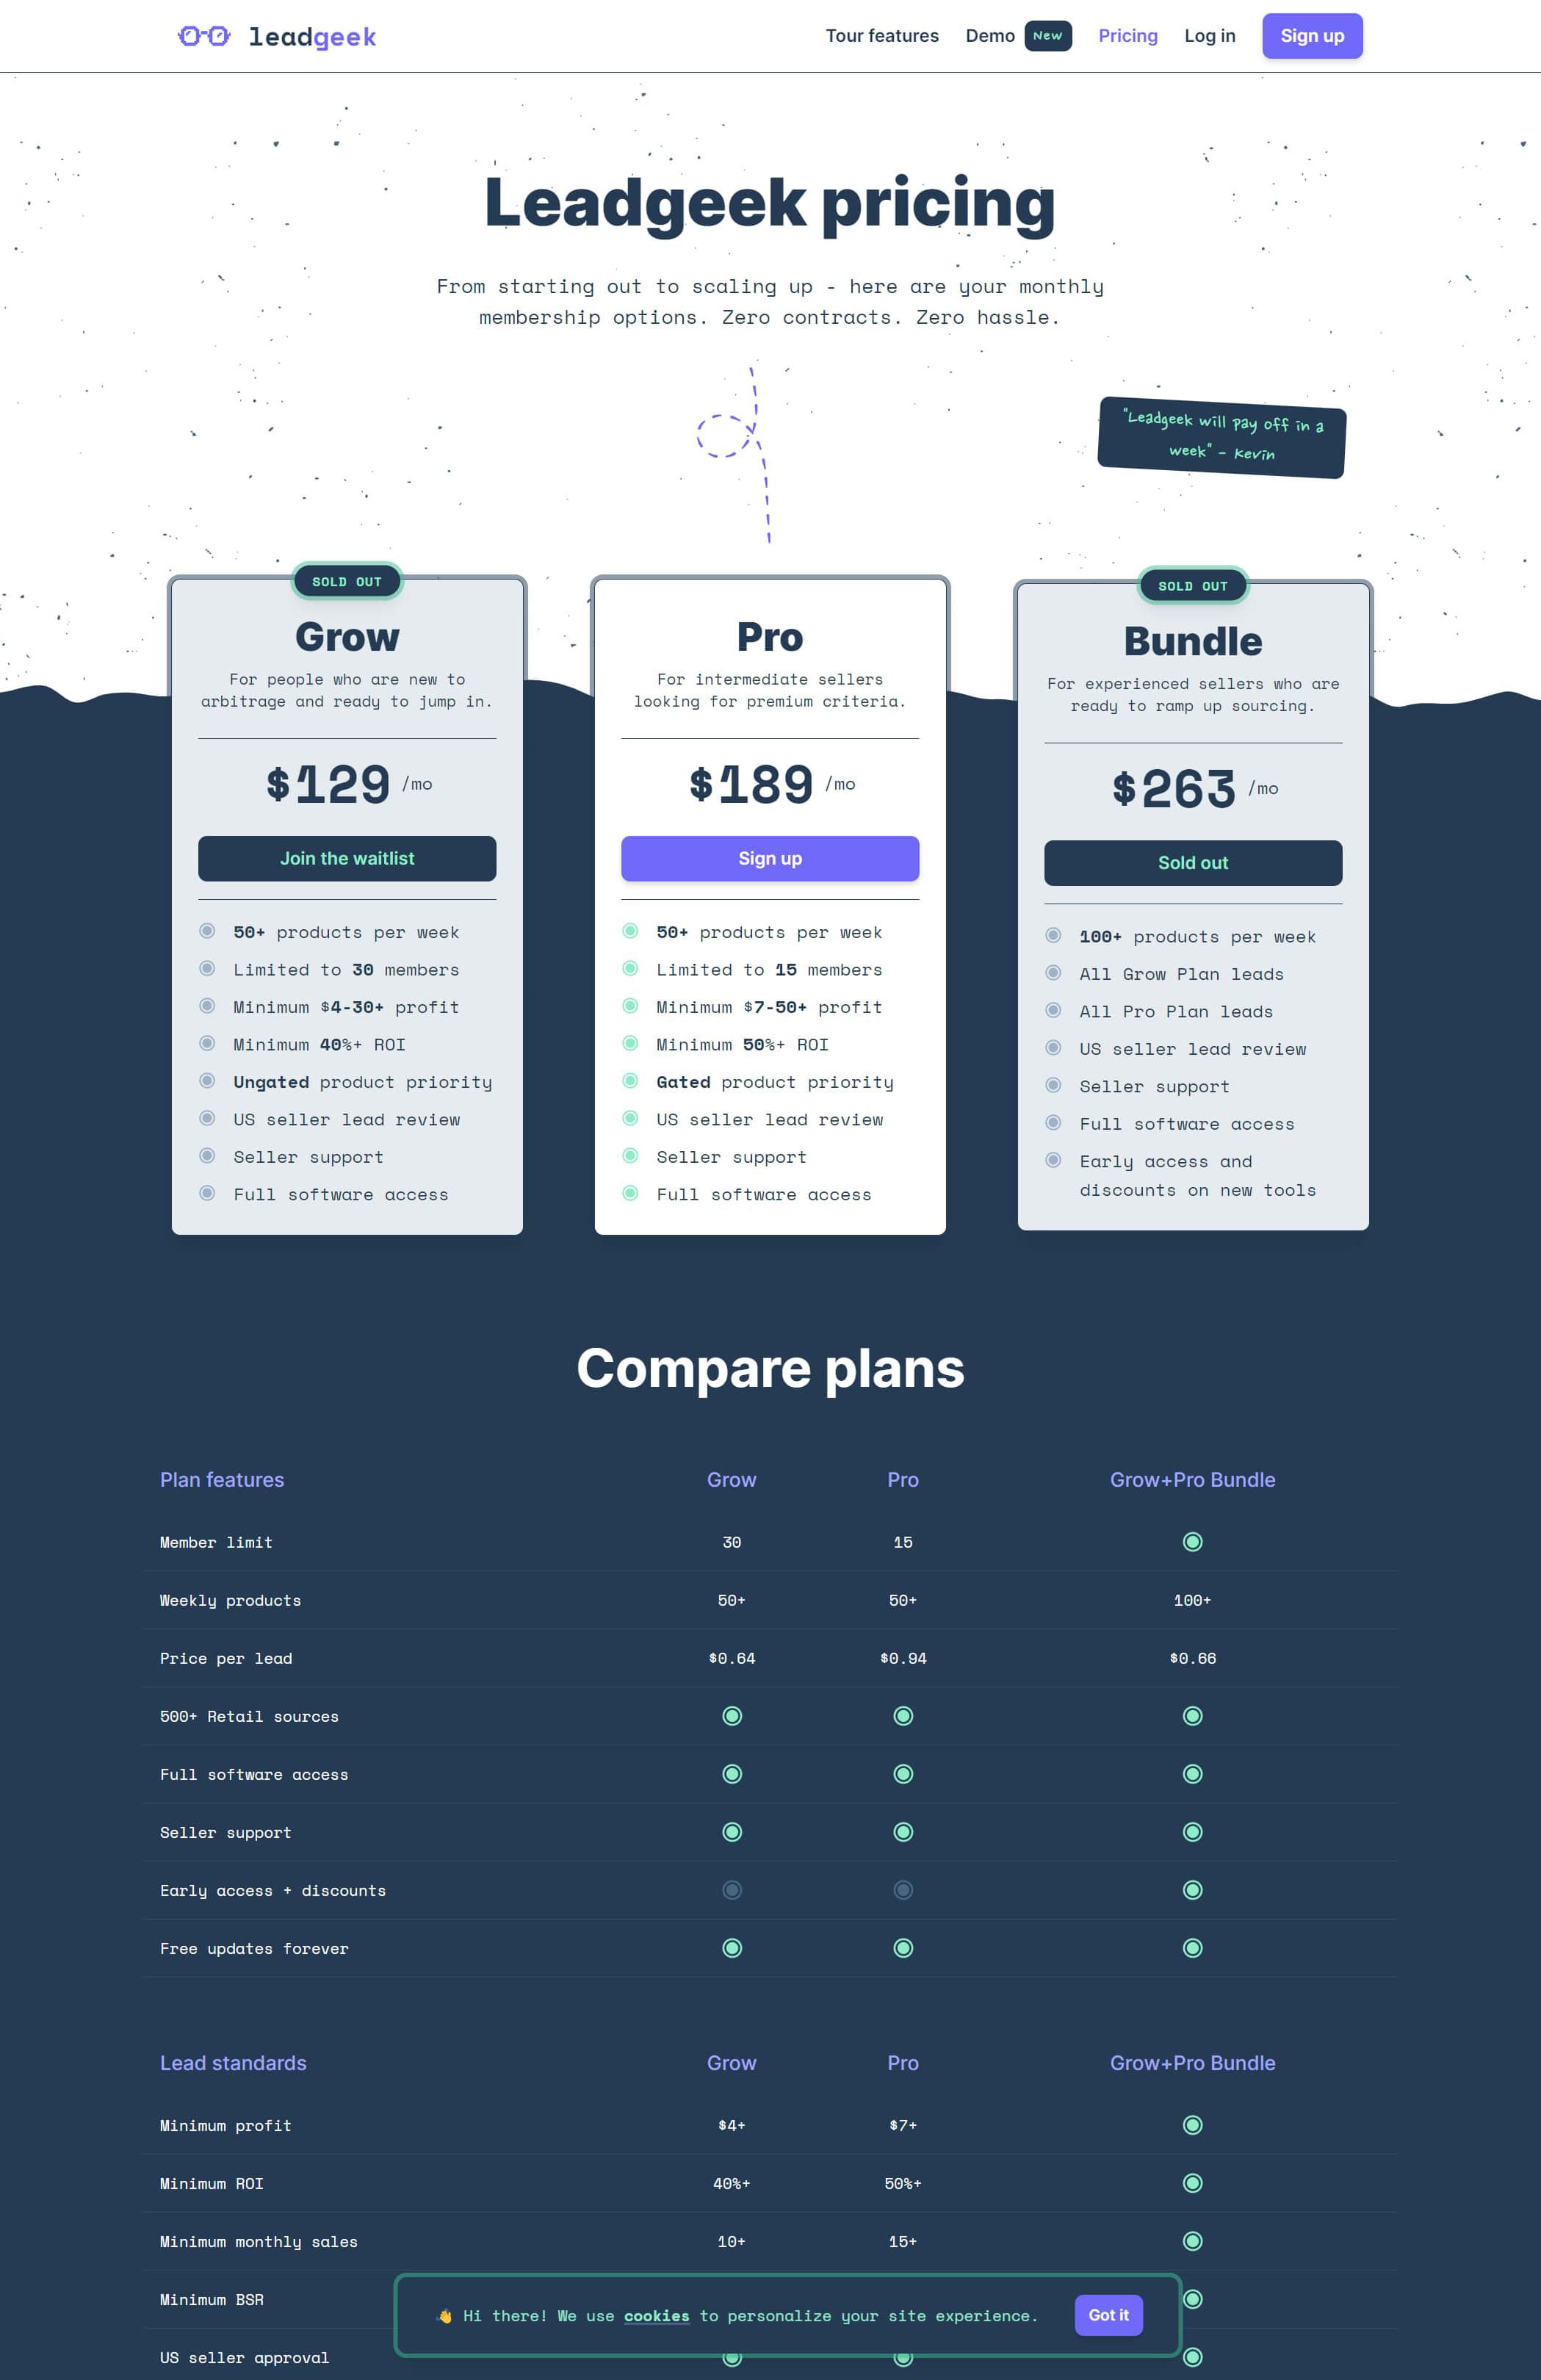 The pricing page